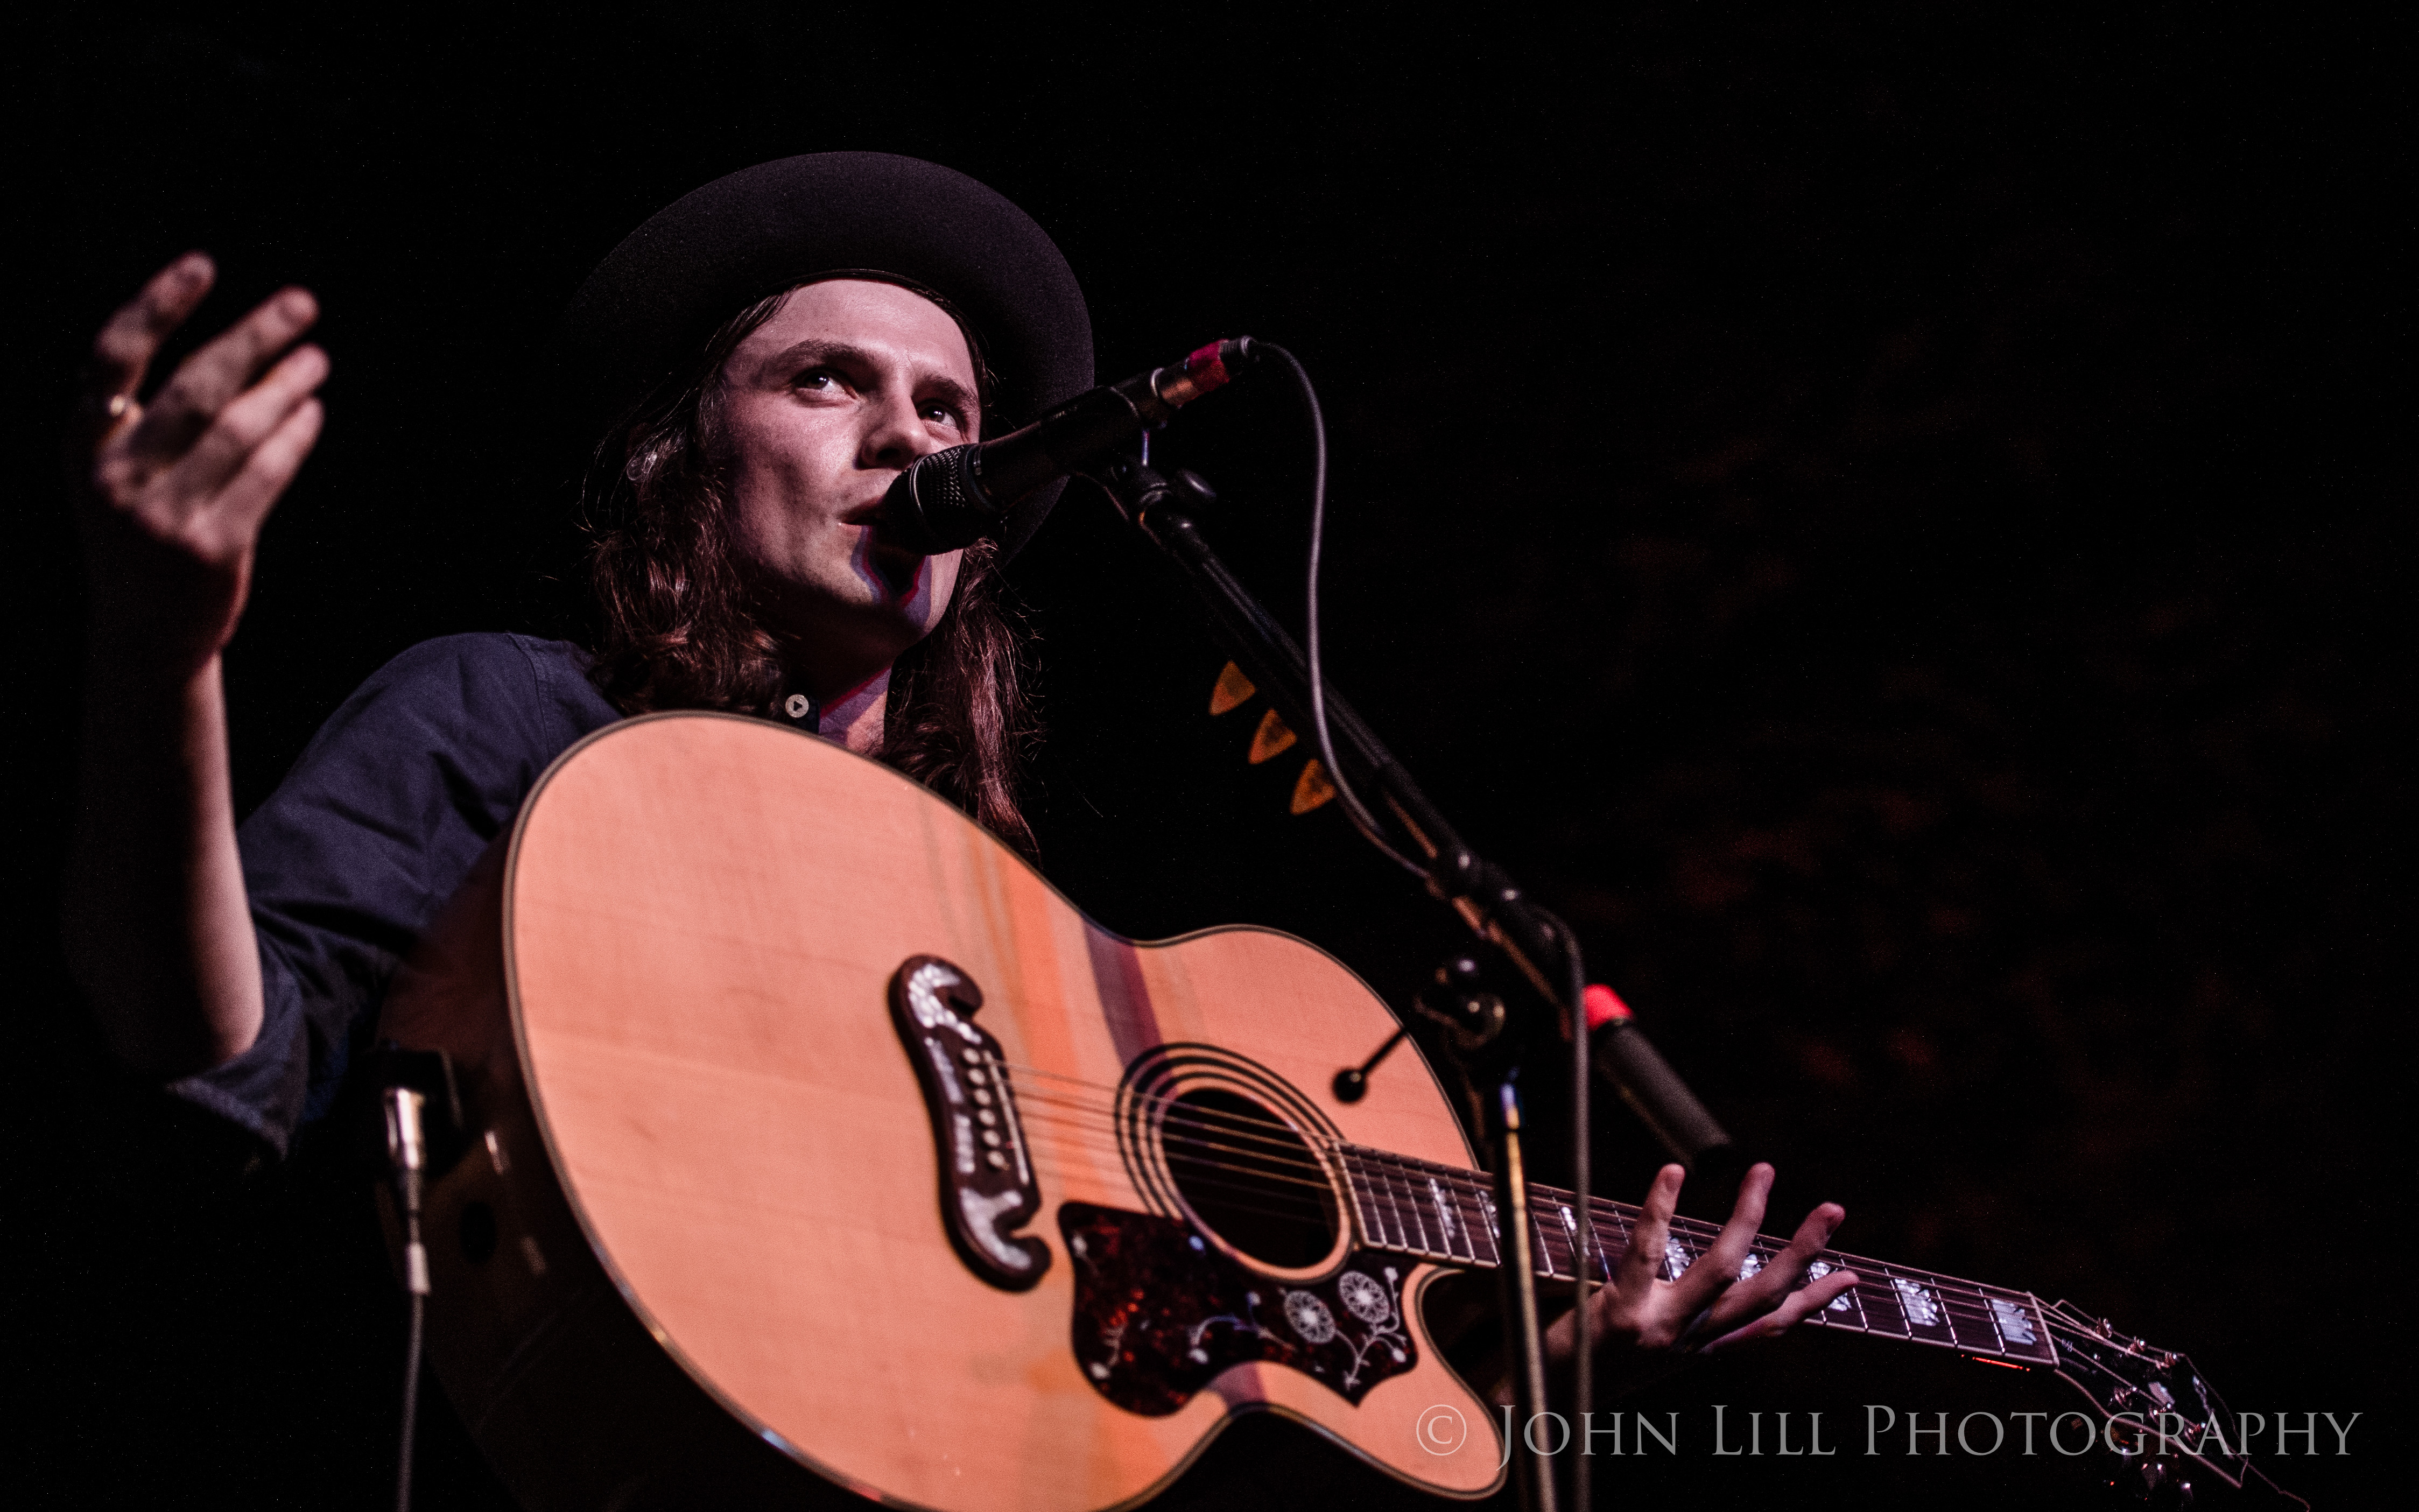 James Bay performs at the Showbox in Seattle. Photo by John Lill